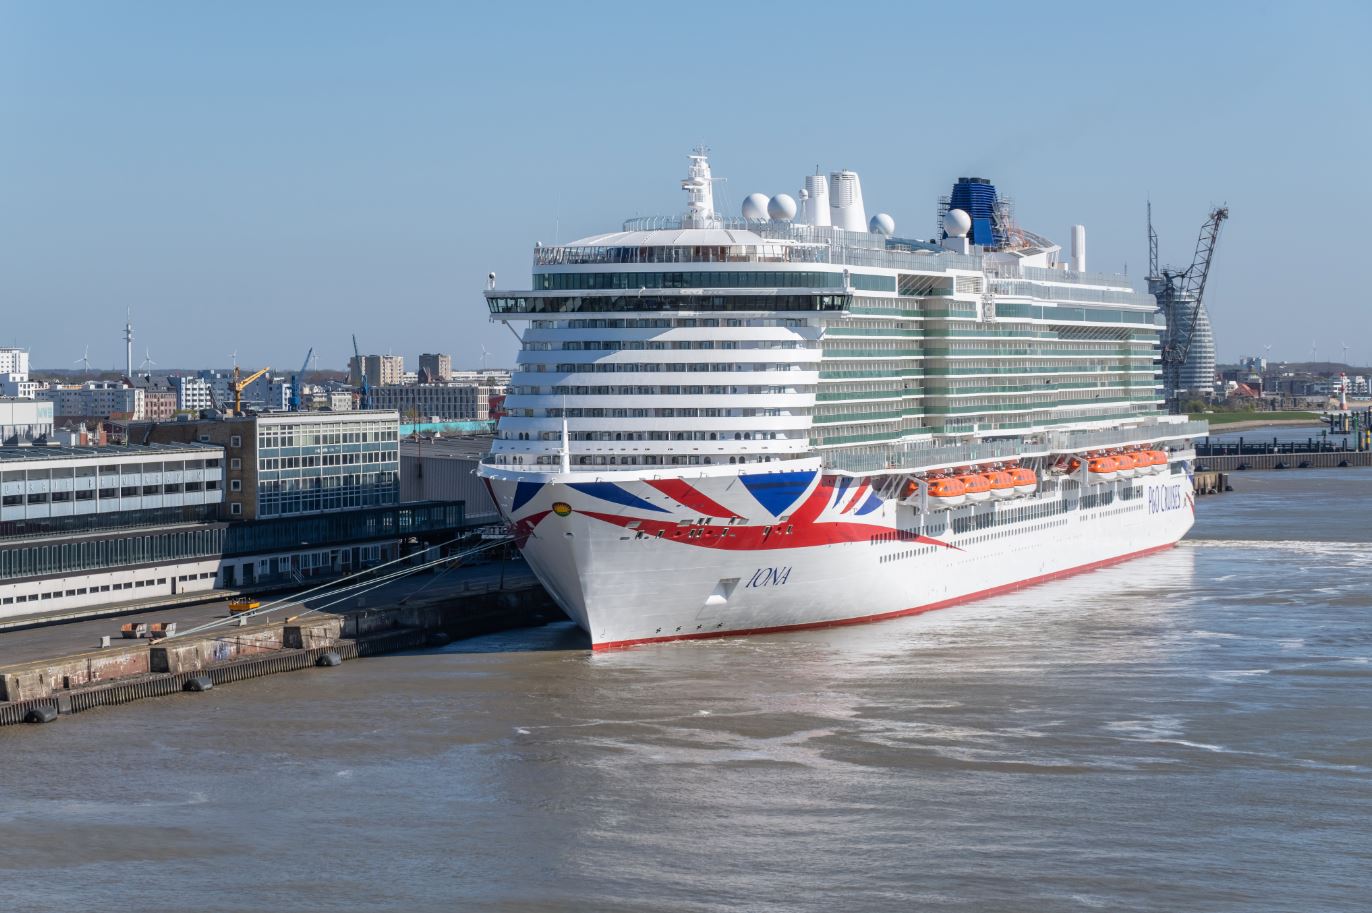 P&O Cruises to take delivery of first LNG-powered newbuild